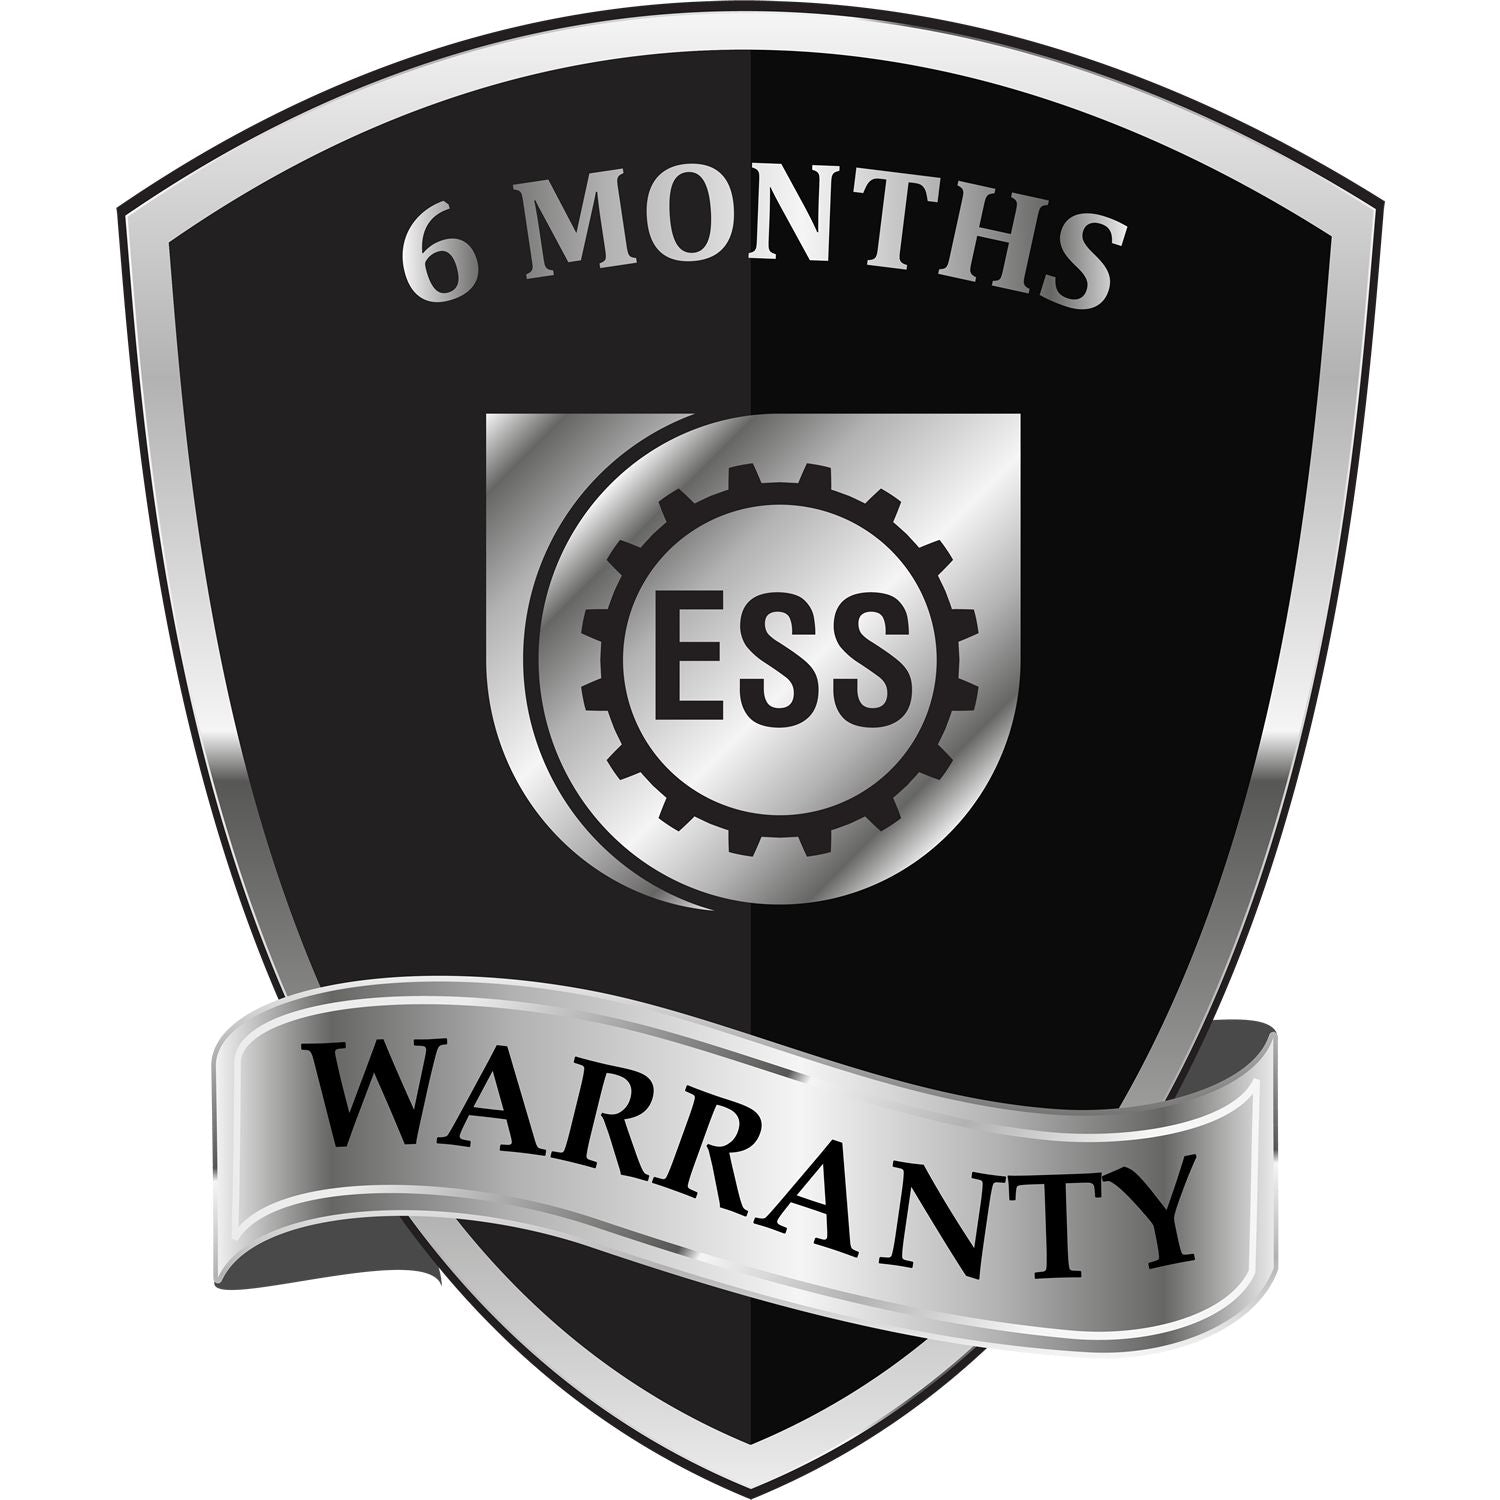 A badge or emblem showing a warranty icon for the Self-Inking Nevada PE Stamp